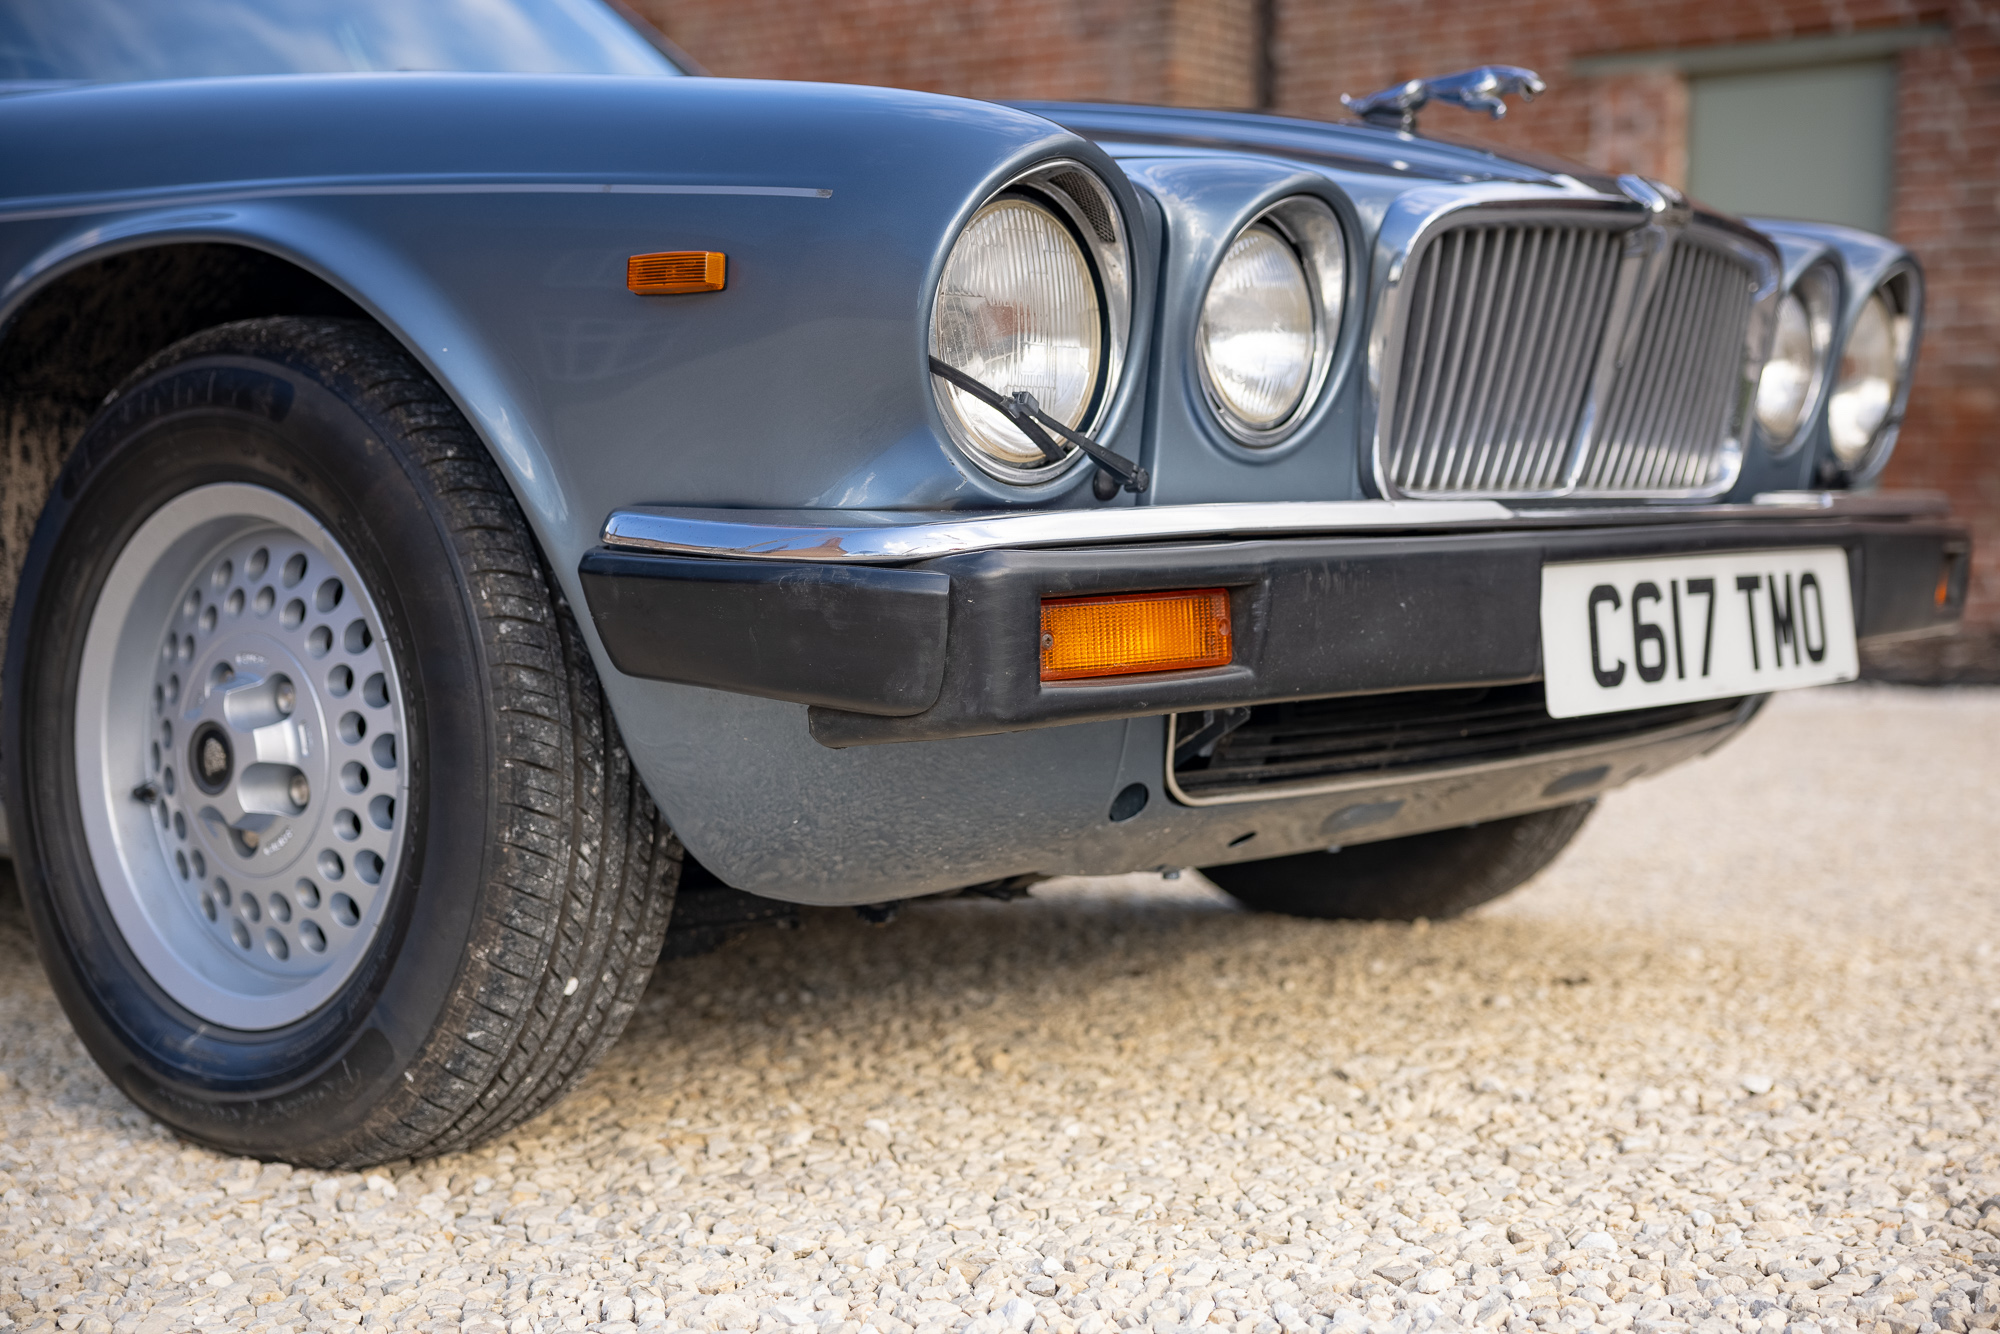 JAGUAR XJ6 SOVEREIGN 4.2 for sale by auction in Loughborough